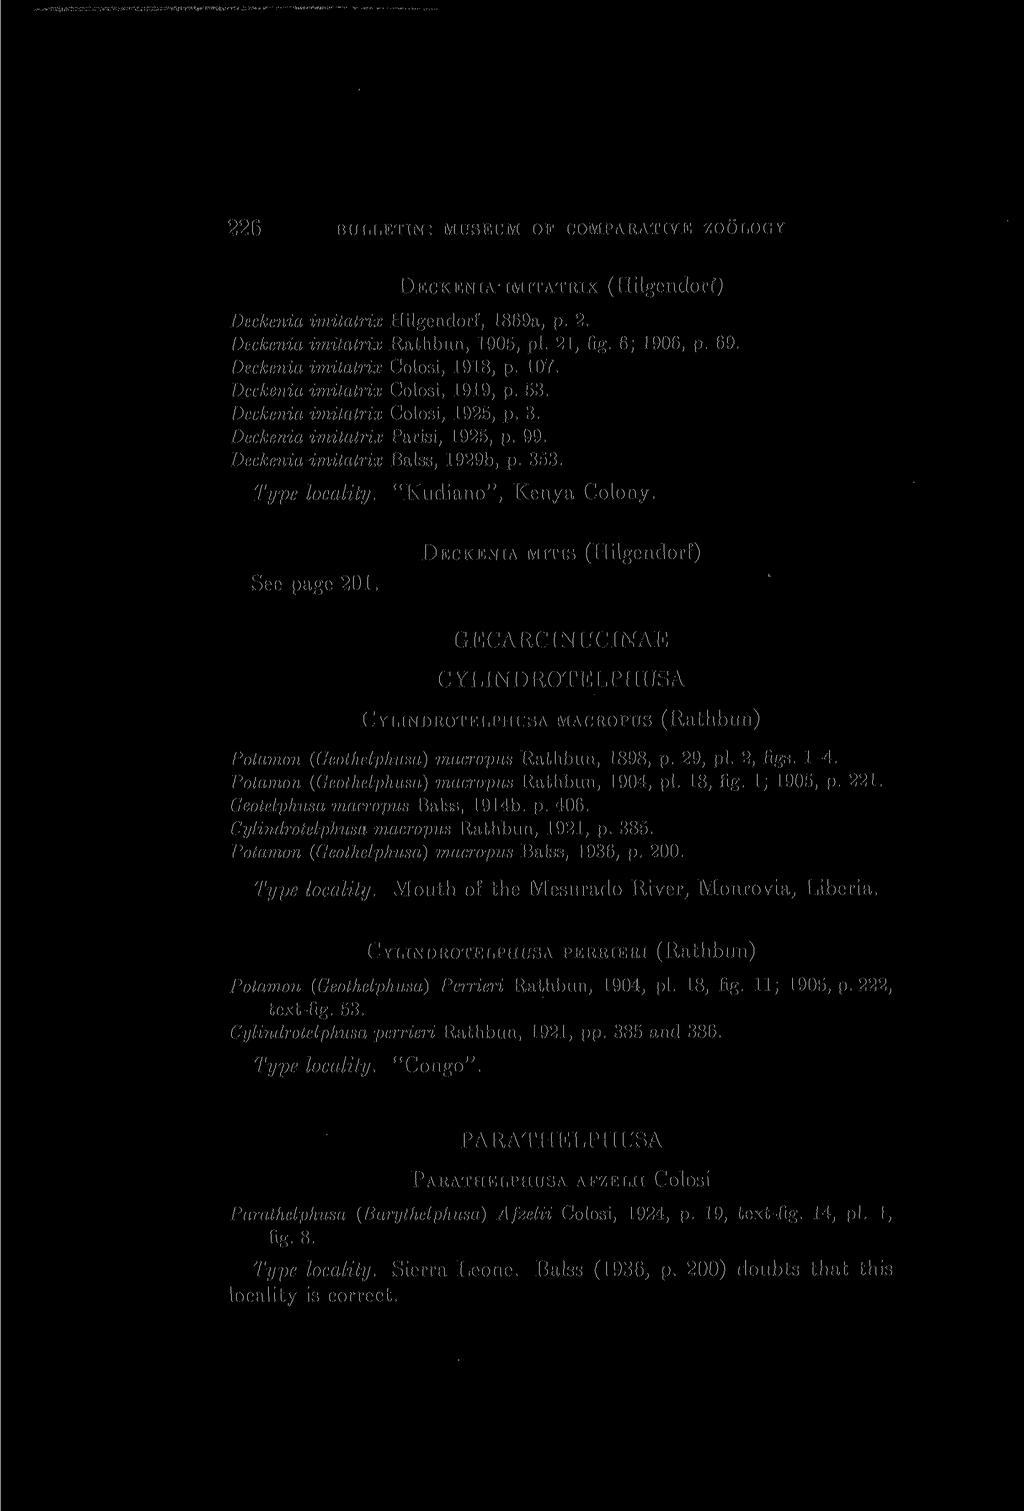 226 BULLETIN: MUSEUM OF COMPARATIVE ZOOLOGY DECKENIA- IMITATRIX (Hilgendorf) Deckenia imitatrix Hilgendorf, 1869a, p. 2. Deckenia imitatrix Rathbun, 1905, pi. 21, fig. 6; 1906, p. 69.